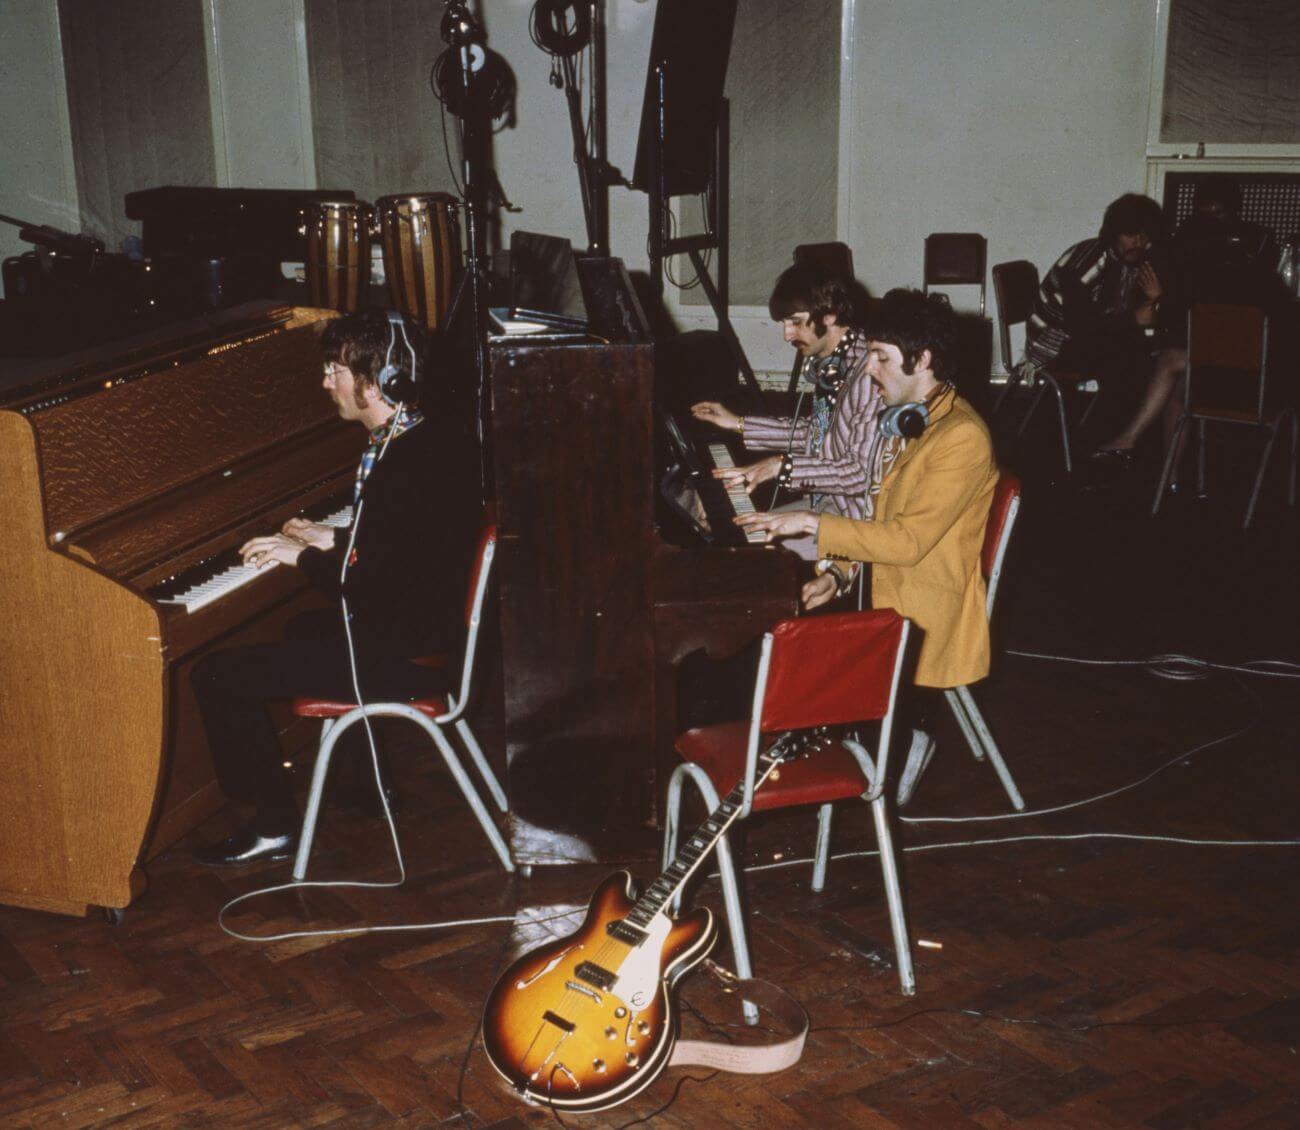 John Lennon sits at a piano wearing headphones. Paul McCartney and Ringo Starr share a piano behind Lennon.